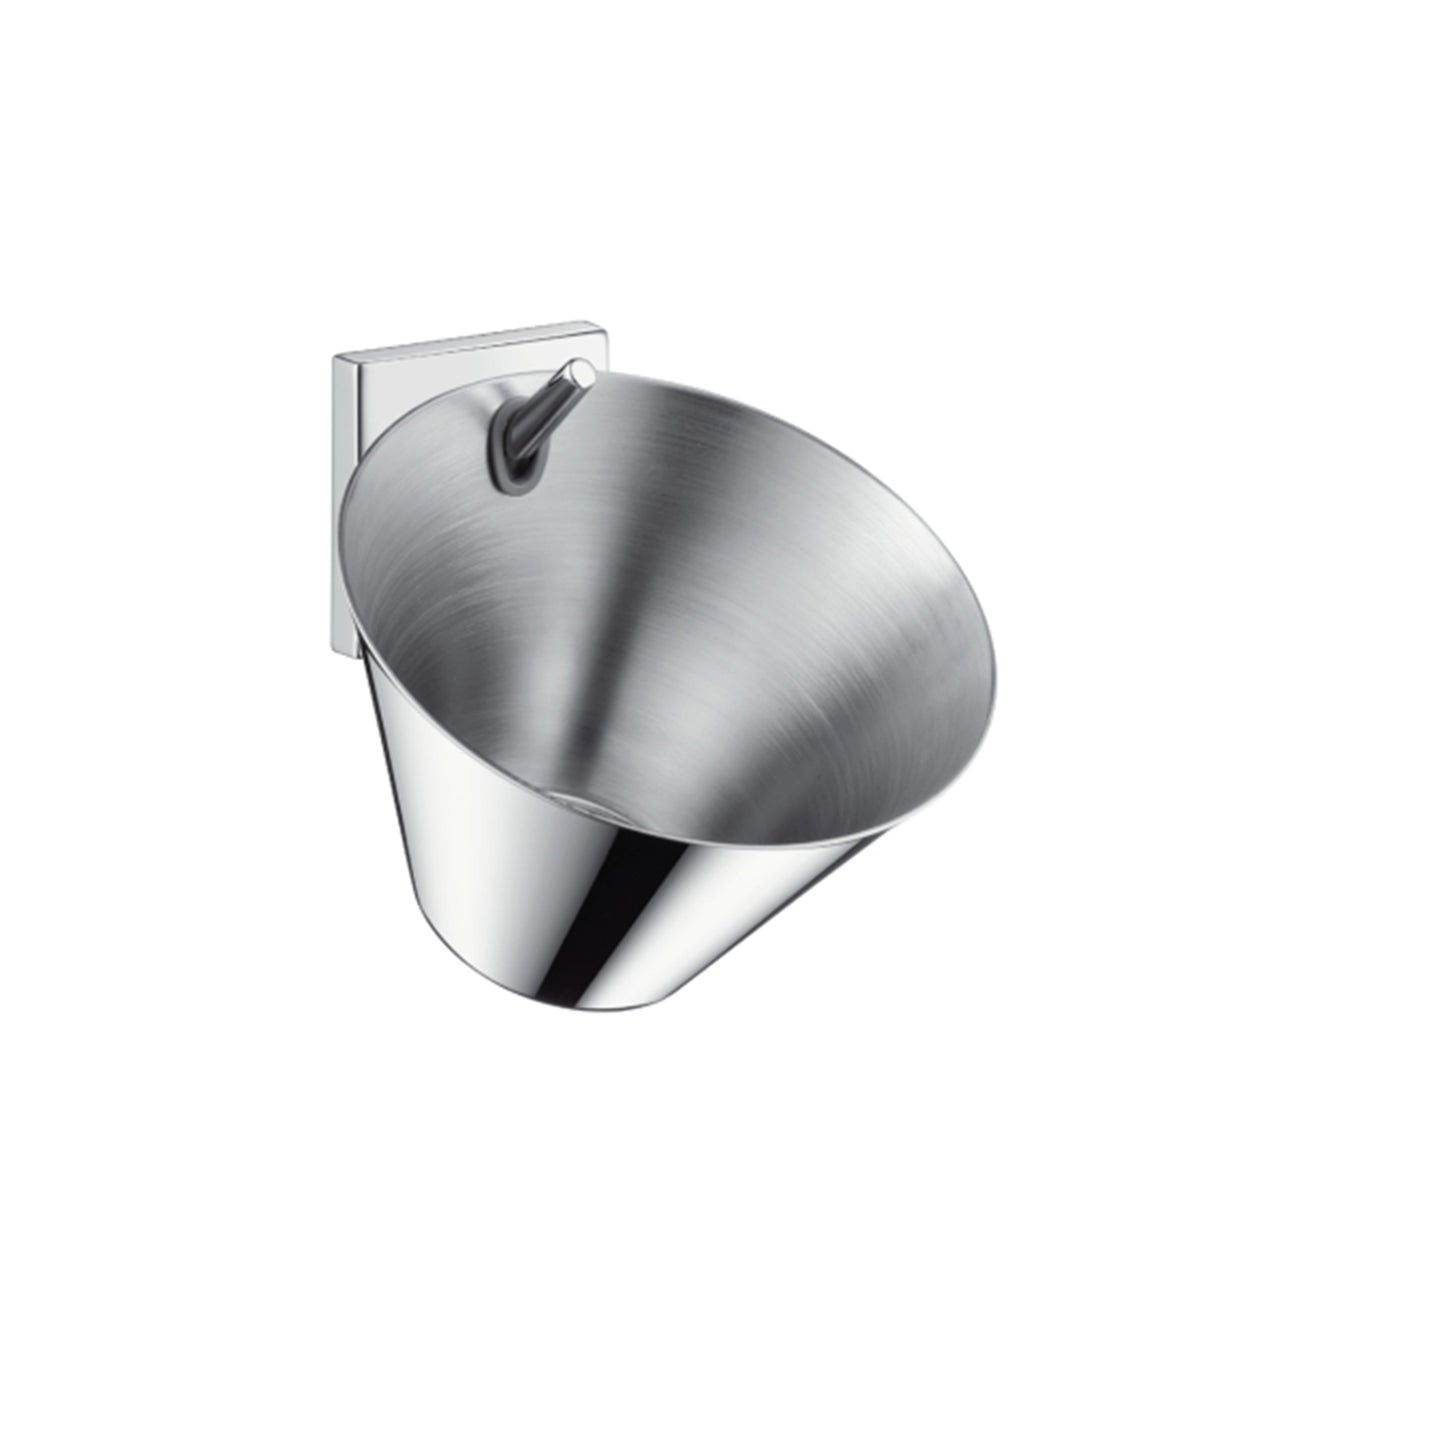 Axor Organic Metal soap dish with holder, Chrome 42733.000